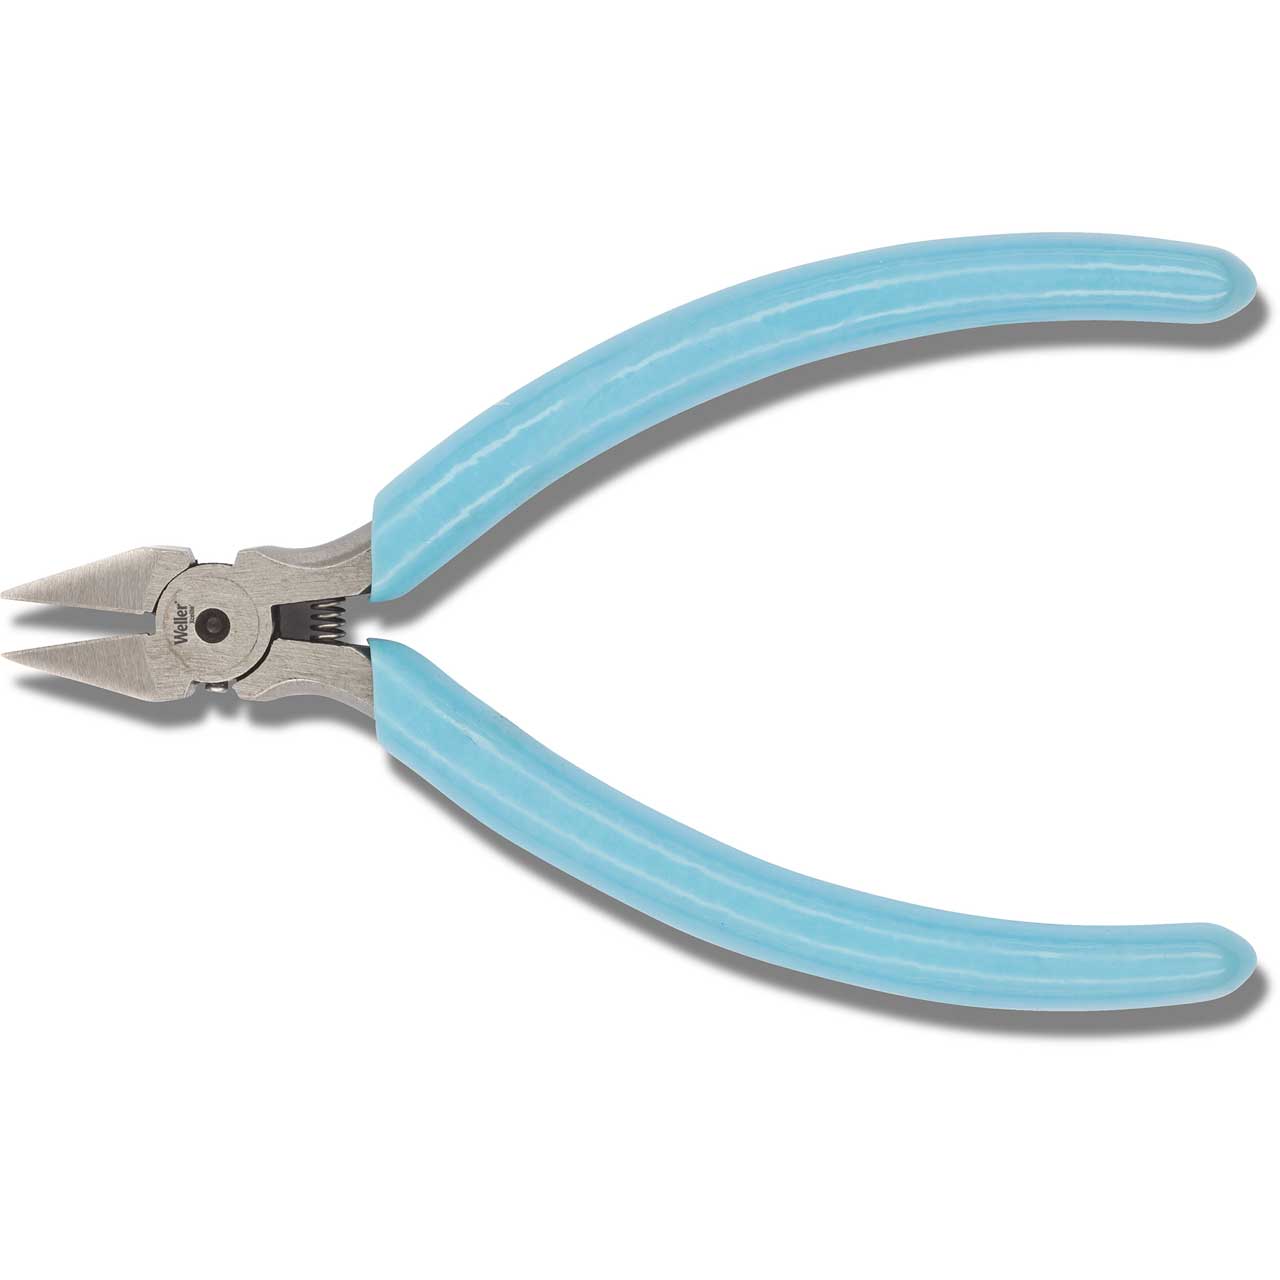 Xcelite MS545VN 4 Inch Slim Tapered Diagonal Cutting Pliers XCL-MS545VN